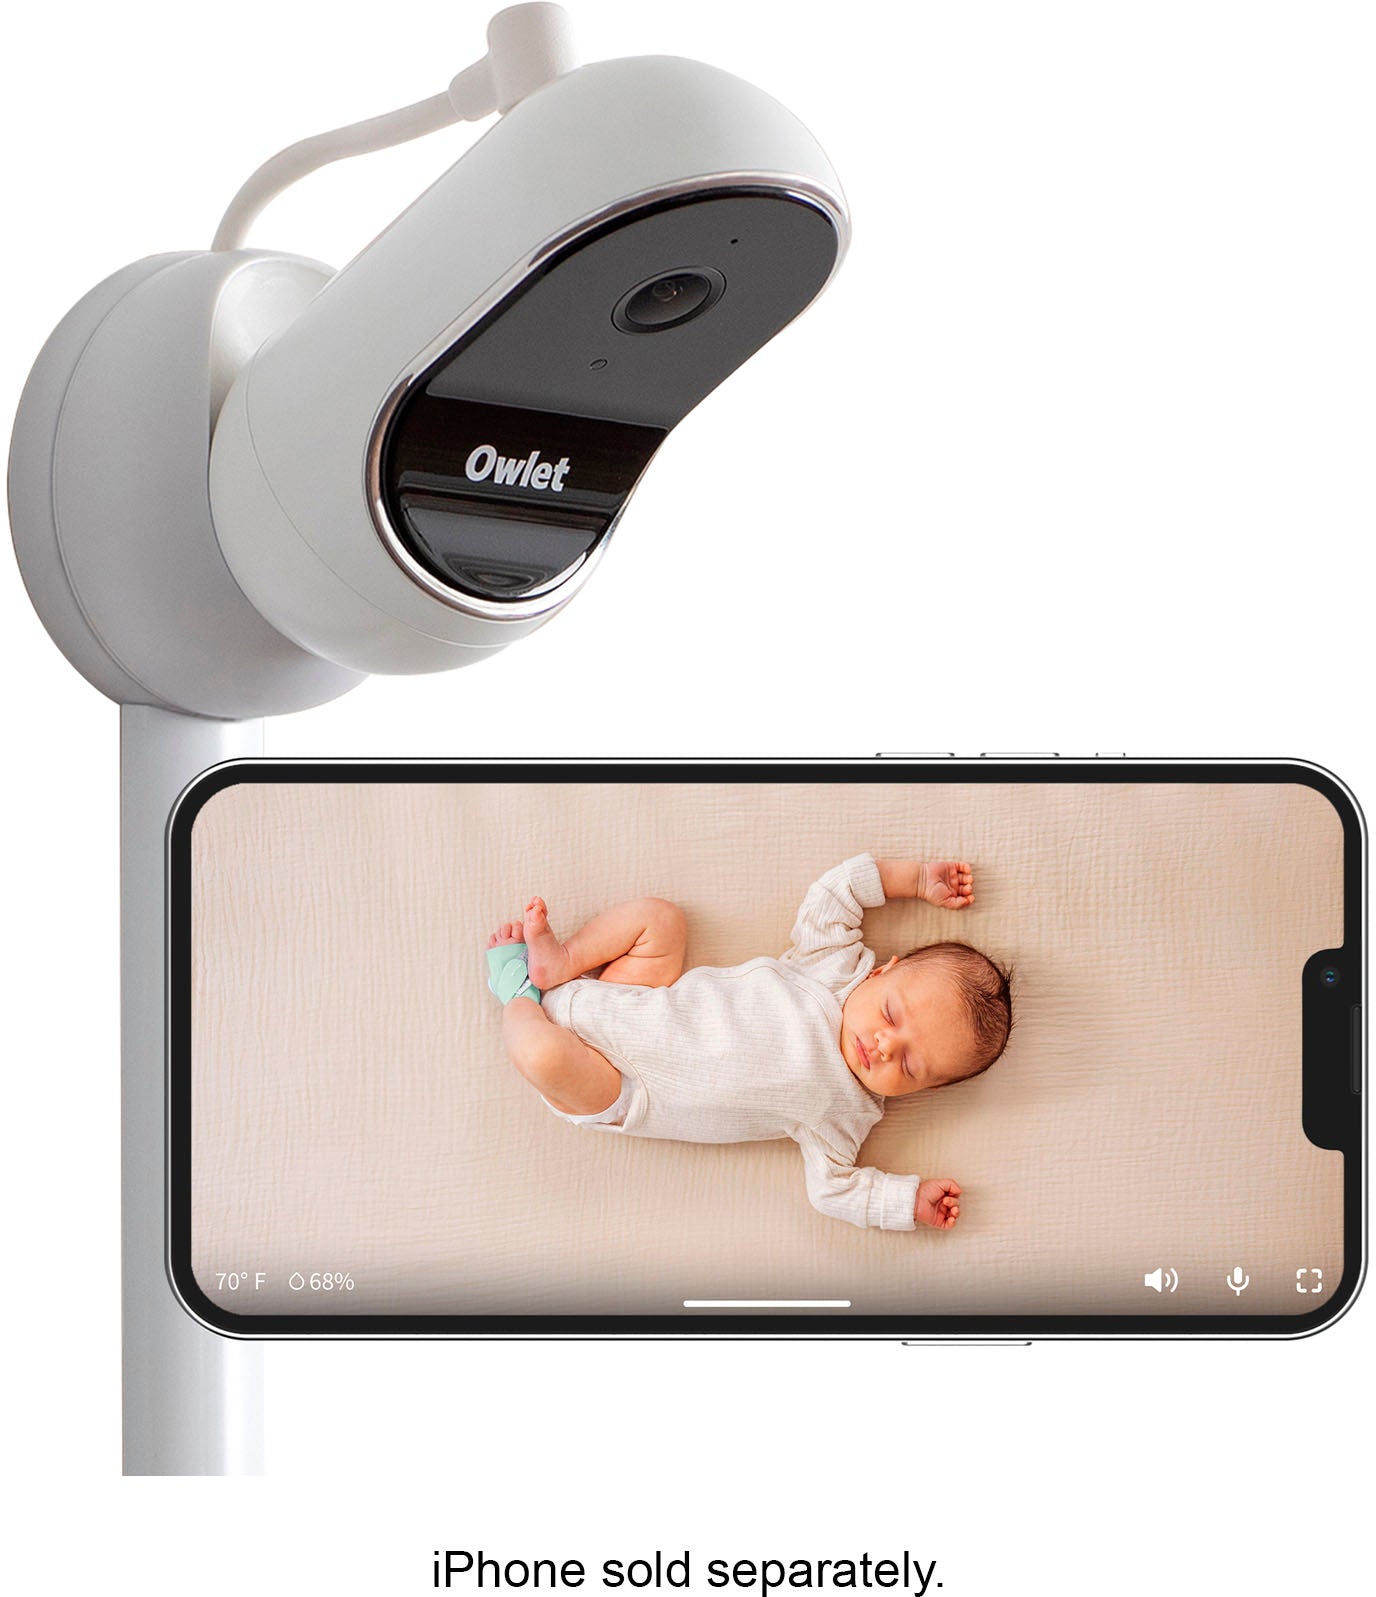 Owlet - Dream Duo: Dream Sock Baby Monitor and HD Camera - Mint